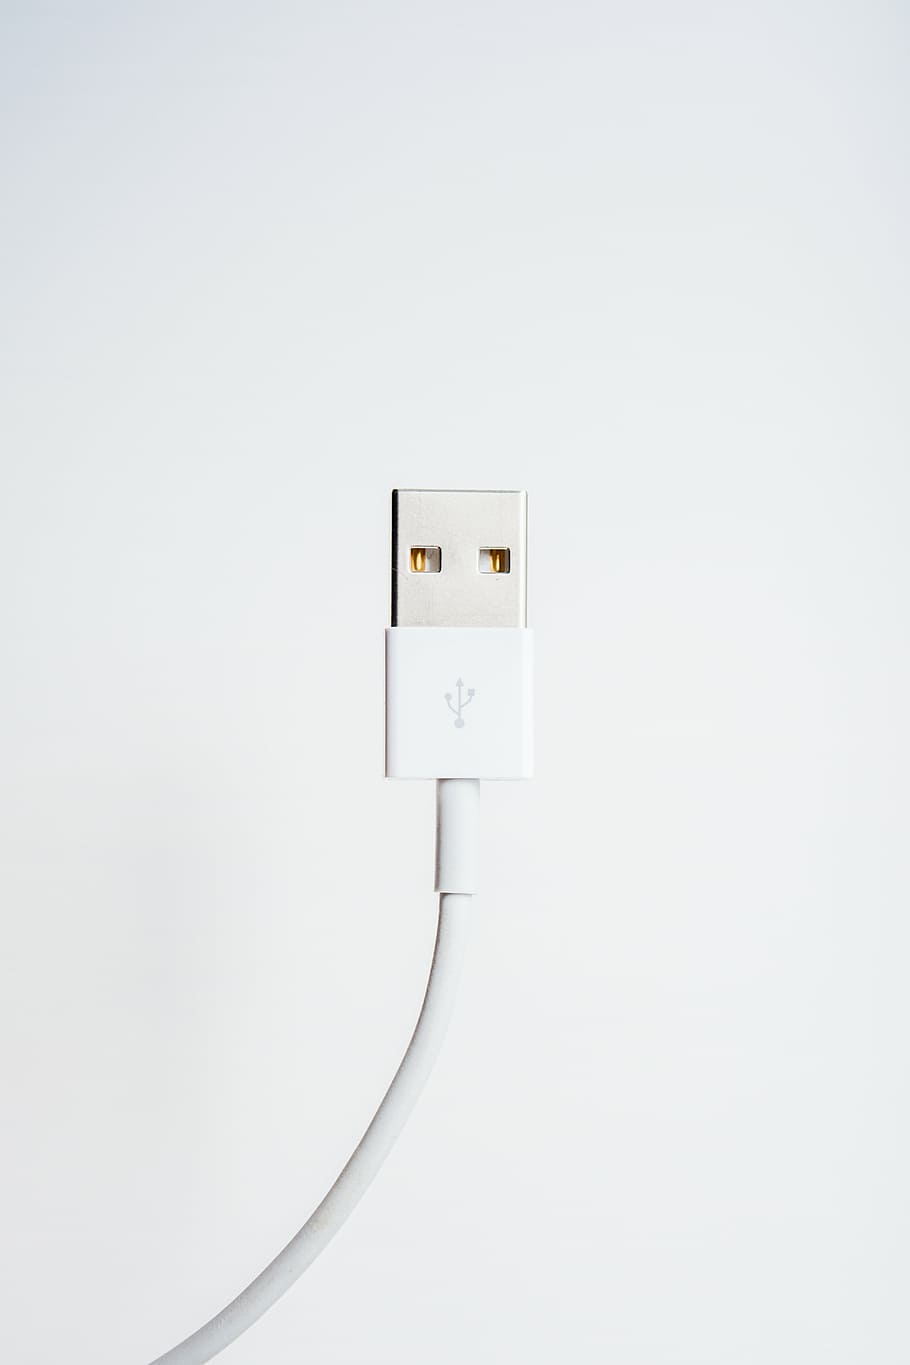 close-up photo, usb cable port, usb, cord, white, wall, technology, electricity, outlet, cable